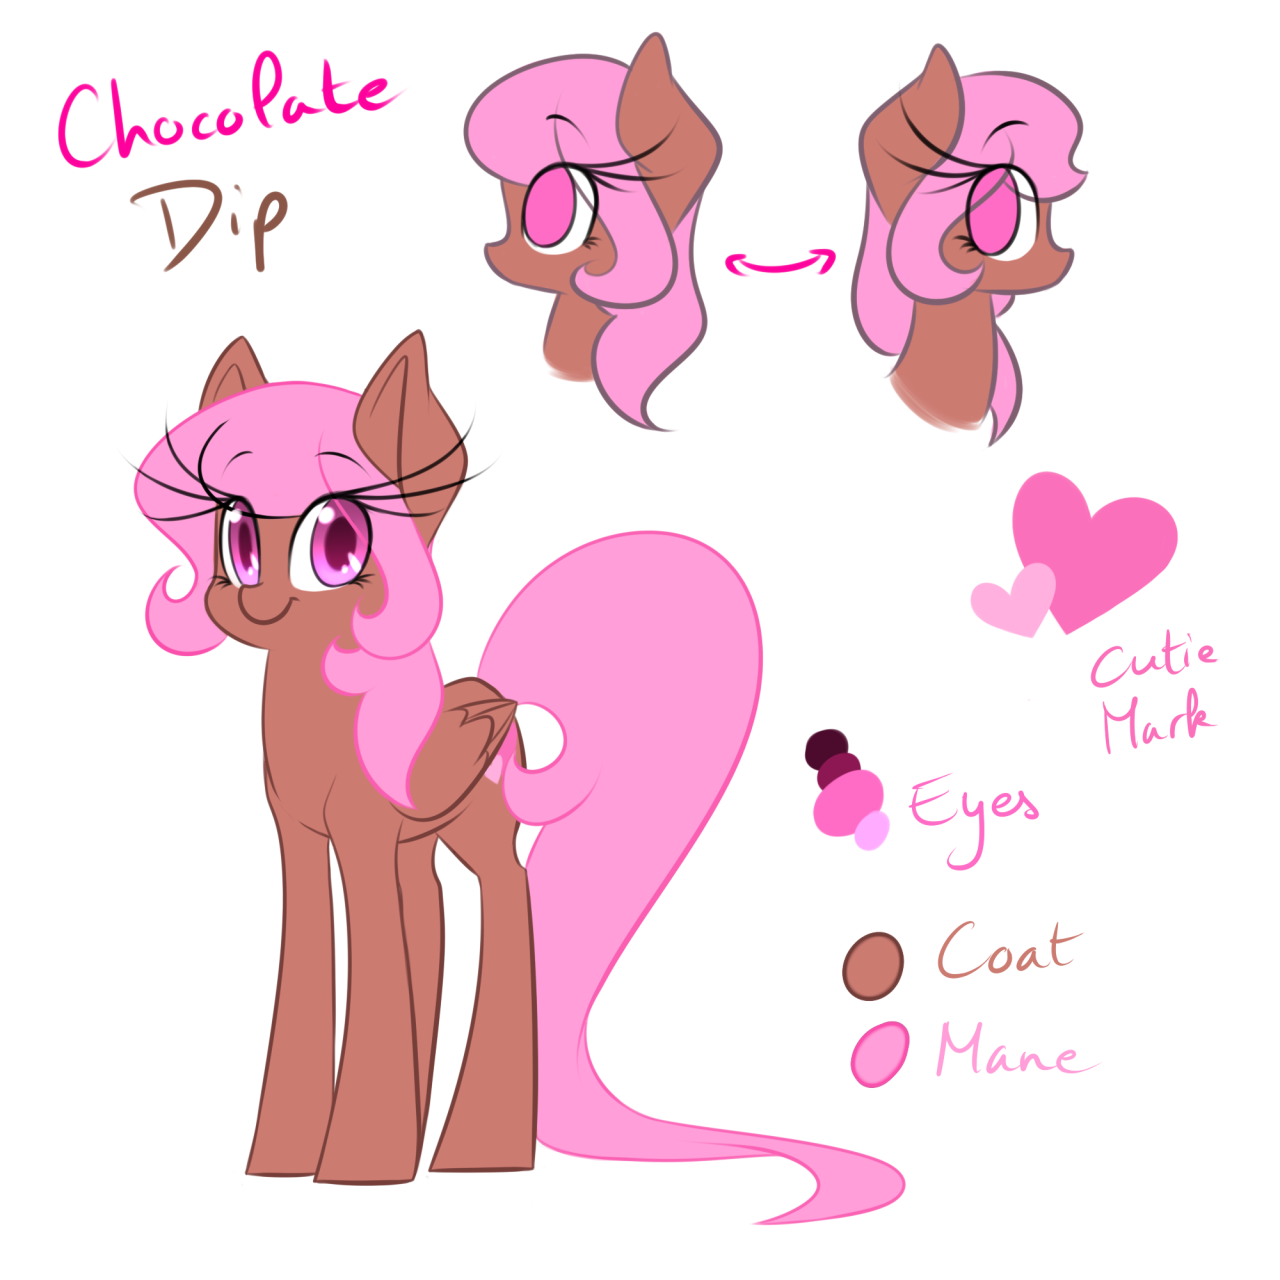 cocochanelchocolat:  Look, I finally made a ref for Chocolate :’D  Lookit dat cutie